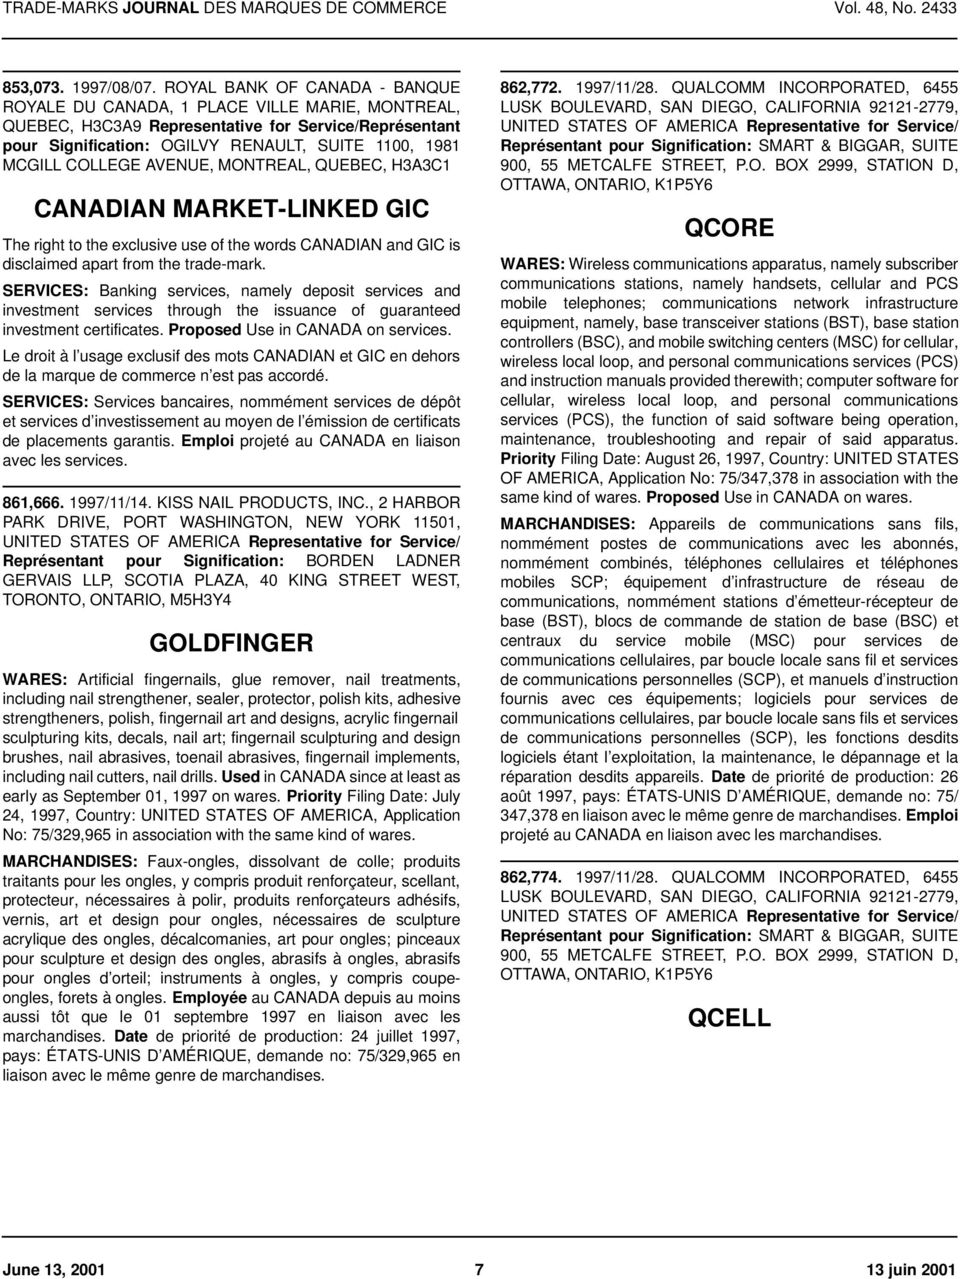 COLLEGE AVENUE, MONTREAL, QUEBEC, H3A3C1 CANADIAN MARKET-LINKED GIC The right to the exclusive use of the words CANADIAN and GIC is disclaimed apart from the trade-mark.